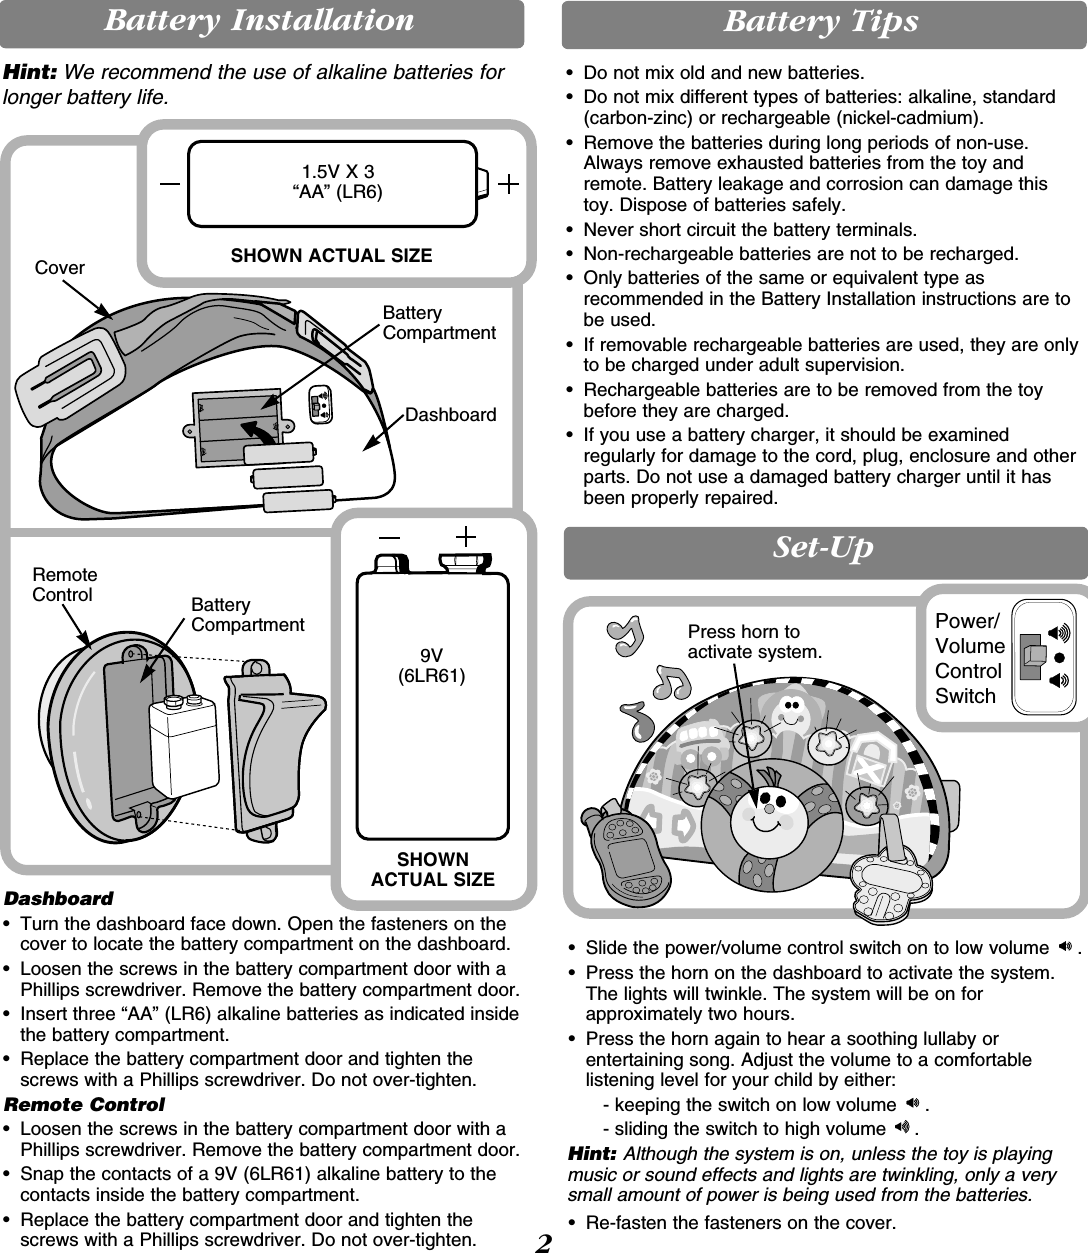 BatteryCompartmentDashboardCoverBattery Installation Battery TipsHint: We recommend the use of alkaline batteries forlonger battery life.9V (6LR61)1.5V X 3“AA” (LR6)SHOWNACTUAL SIZESHOWN ACTUAL SIZEBatteryCompartmentRemoteControlDashboard• Turn the dashboard face down. Open the fasteners on thecover to locate the battery compartment on the dashboard.• Loosen the screws in the battery compartment door with aPhillips screwdriver. Remove the battery compartment door.•  Insert three “AA” (LR6) alkaline batteries as indicated insidethe battery compartment.•  Replace the battery compartment door and tighten thescrews with a Phillips screwdriver. Do not over-tighten.Remote Control• Loosen the screws in the battery compartment door with aPhillips screwdriver. Remove the battery compartment door.•  Snap the contacts of a 9V (6LR61) alkaline battery to thecontacts inside the battery compartment.•  Replace the battery compartment door and tighten thescrews with a Phillips screwdriver. Do not over-tighten. 2Set-Up• Slide the power/volume control switch on to low volume  .• Press the horn on the dashboard to activate the system.The lights will twinkle. The system will be on forapproximately two hours.• Press the horn again to hear a soothing lullaby orentertaining song. Adjust the volume to a comfortablelistening level for your child by either:- keeping the switch on low volume  .- sliding the switch to high volume  .Hint: Although the system is on, unless the toy is playingmusic or sound effects and lights are twinkling, only a verysmall amount of power is being used from the batteries.• Re-fasten the fasteners on the cover.Press horn toactivate system.Power/VolumeControlSwitch• Do not mix old and new batteries.• Do not mix different types of batteries: alkaline, standard(carbon-zinc) or rechargeable (nickel-cadmium).• Remove the batteries during long periods of non-use.Always remove exhausted batteries from the toy andremote. Battery leakage and corrosion can damage this toy. Dispose of batteries safely.• Never short circuit the battery terminals.• Non-rechargeable batteries are not to be recharged.• Only batteries of the same or equivalent type asrecommended in the Battery Installation instructions are tobe used.• If removable rechargeable batteries are used, they are onlyto be charged under adult supervision.• Rechargeable batteries are to be removed from the toybefore they are charged.• If you use a battery charger, it should be examinedregularly for damage to the cord, plug, enclosure and otherparts. Do not use a damaged battery charger until it hasbeen properly repaired.